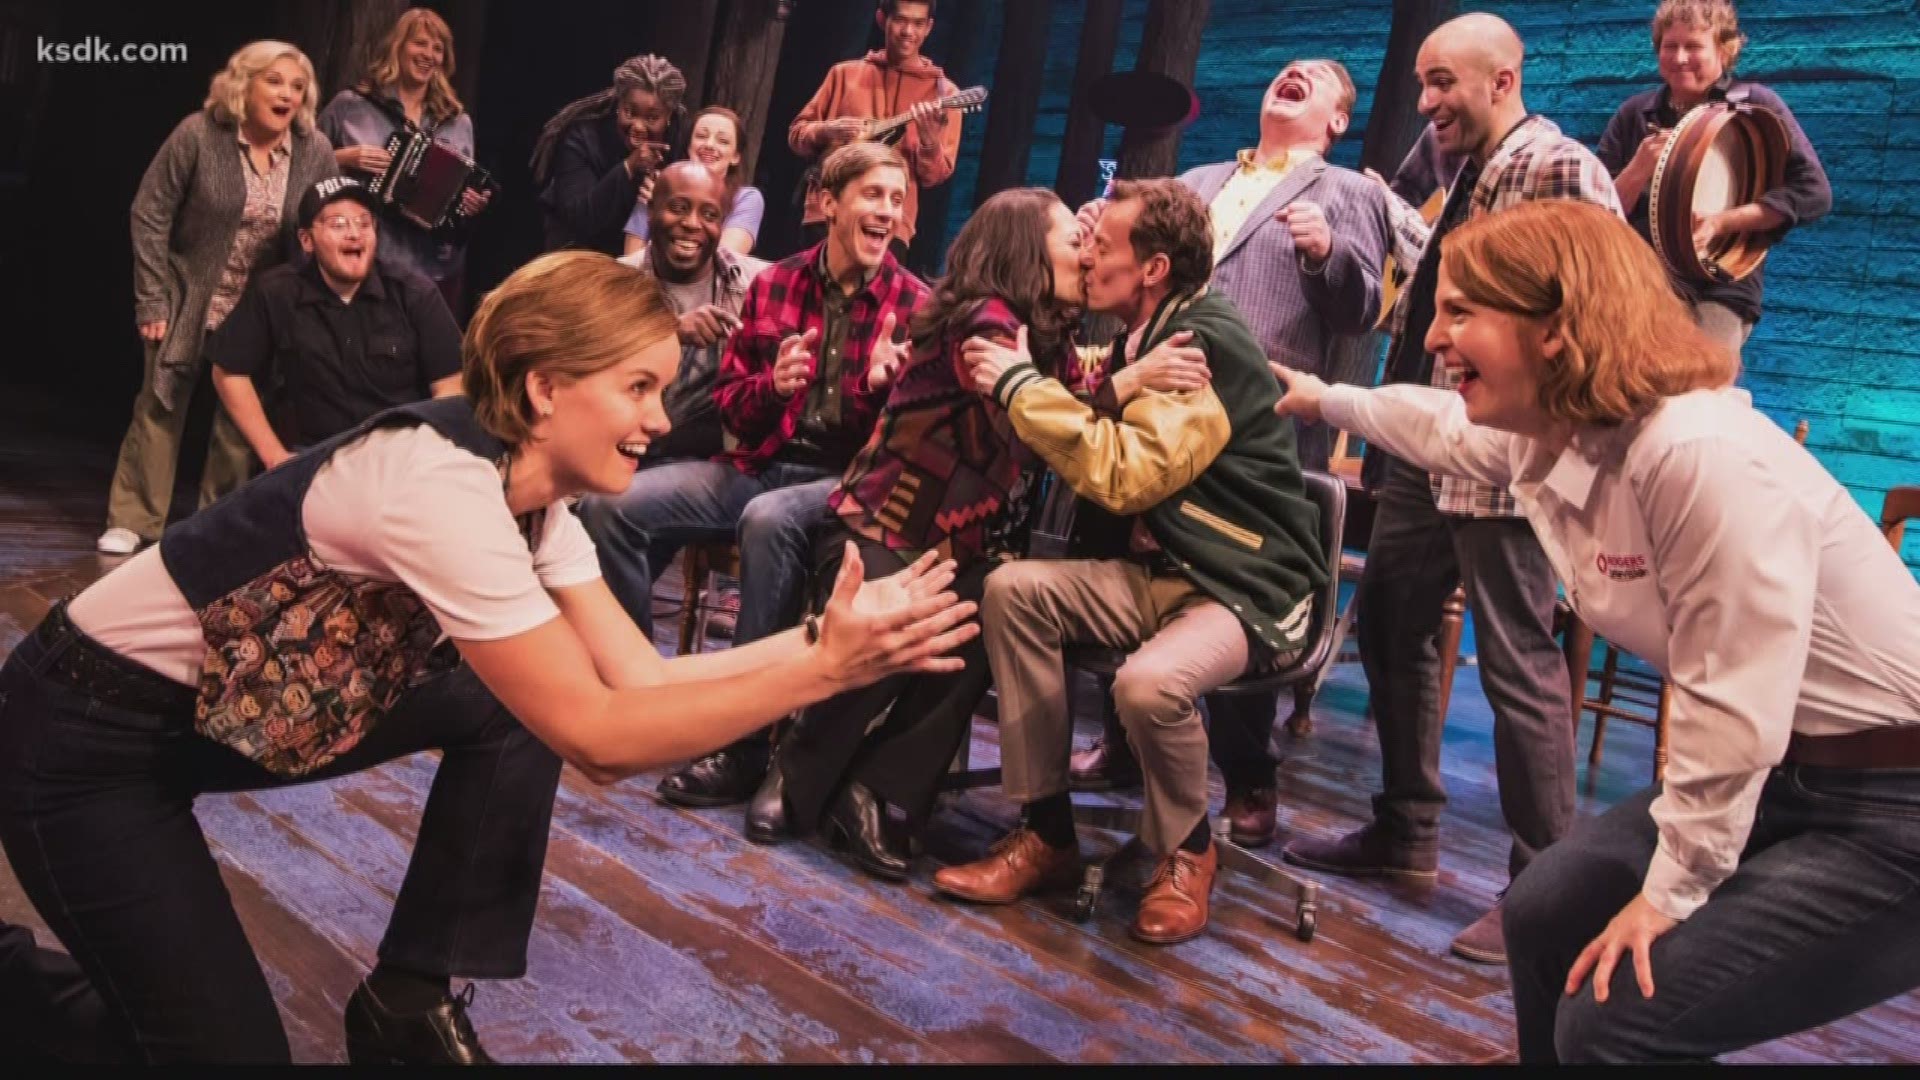 "Come From Away" is at the Fabulous Fox through Sunday, May 26, 2019.